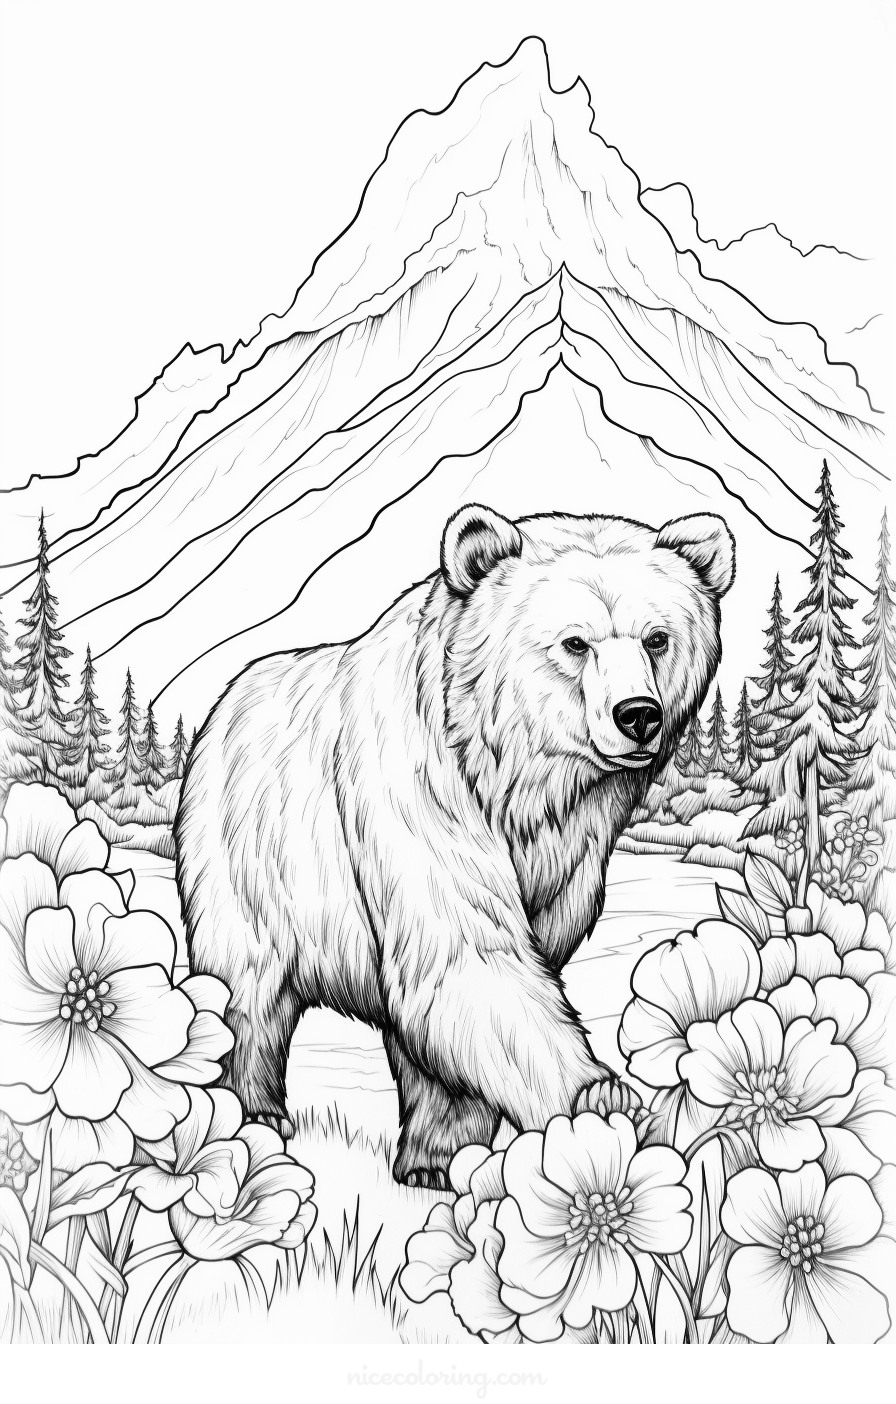 Bear family in the forest coloring